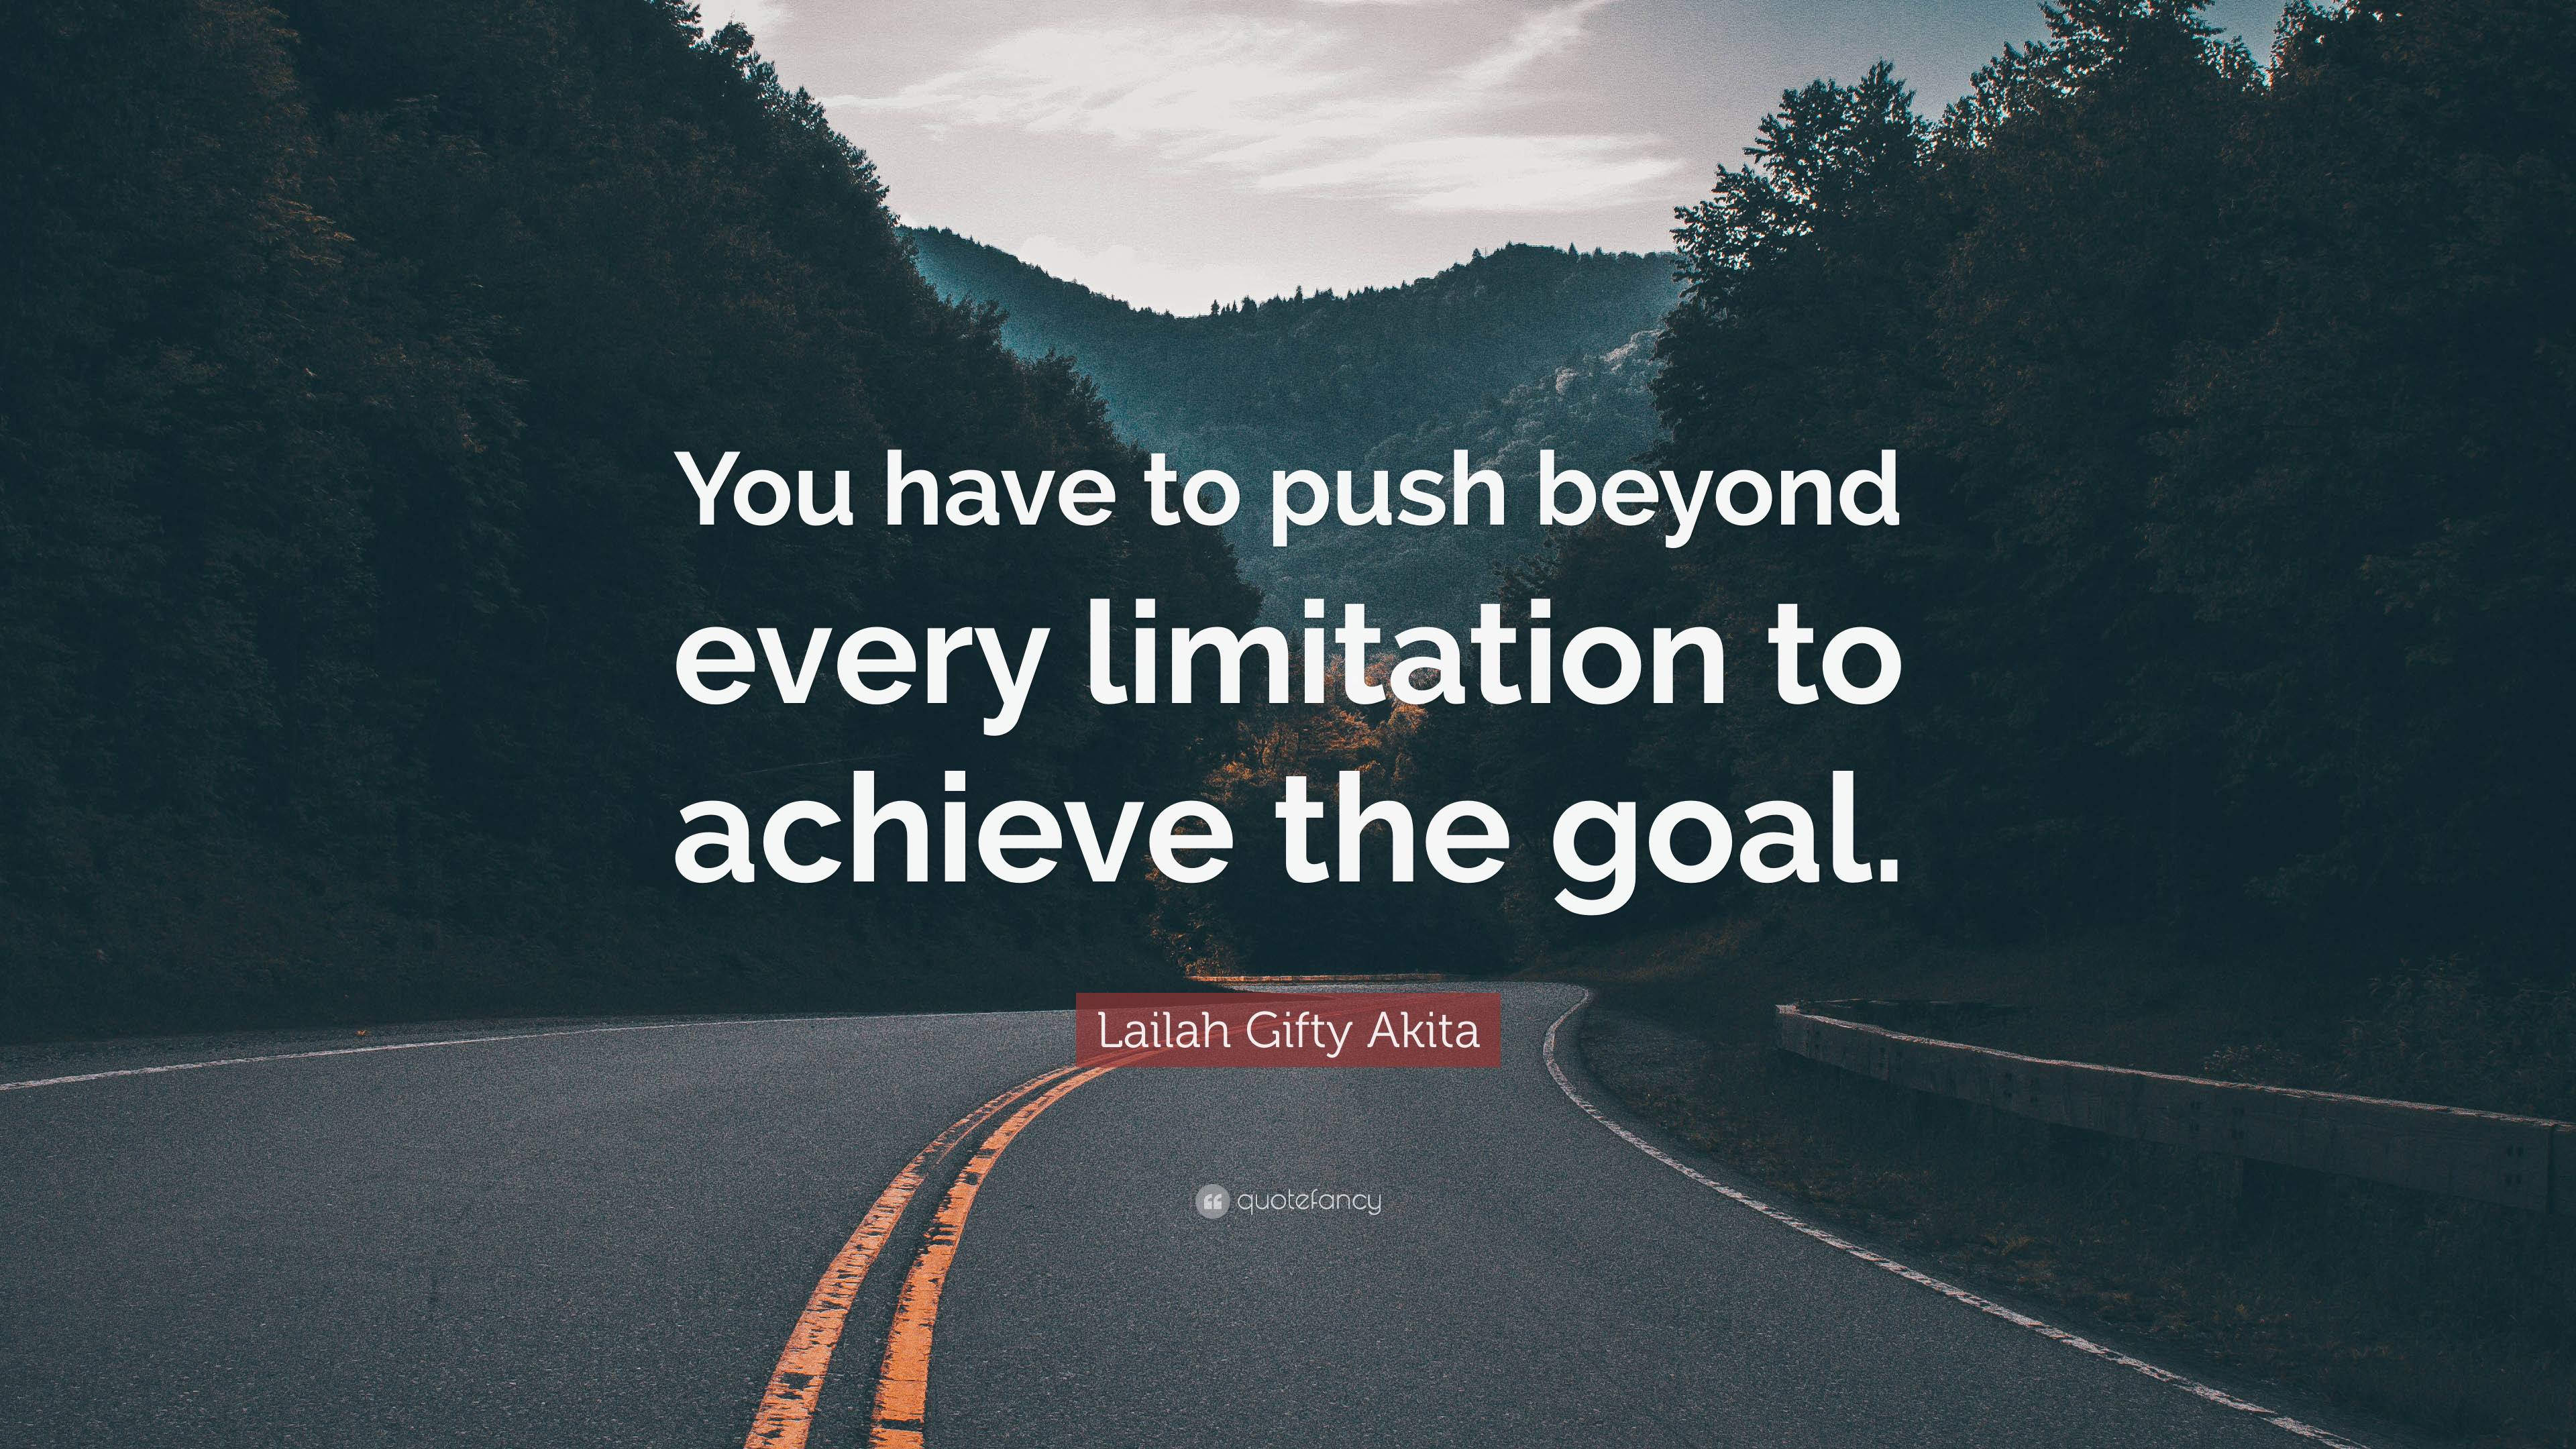 Lailah Gifty Akita Quote: “You have to push beyond every limitation to ...